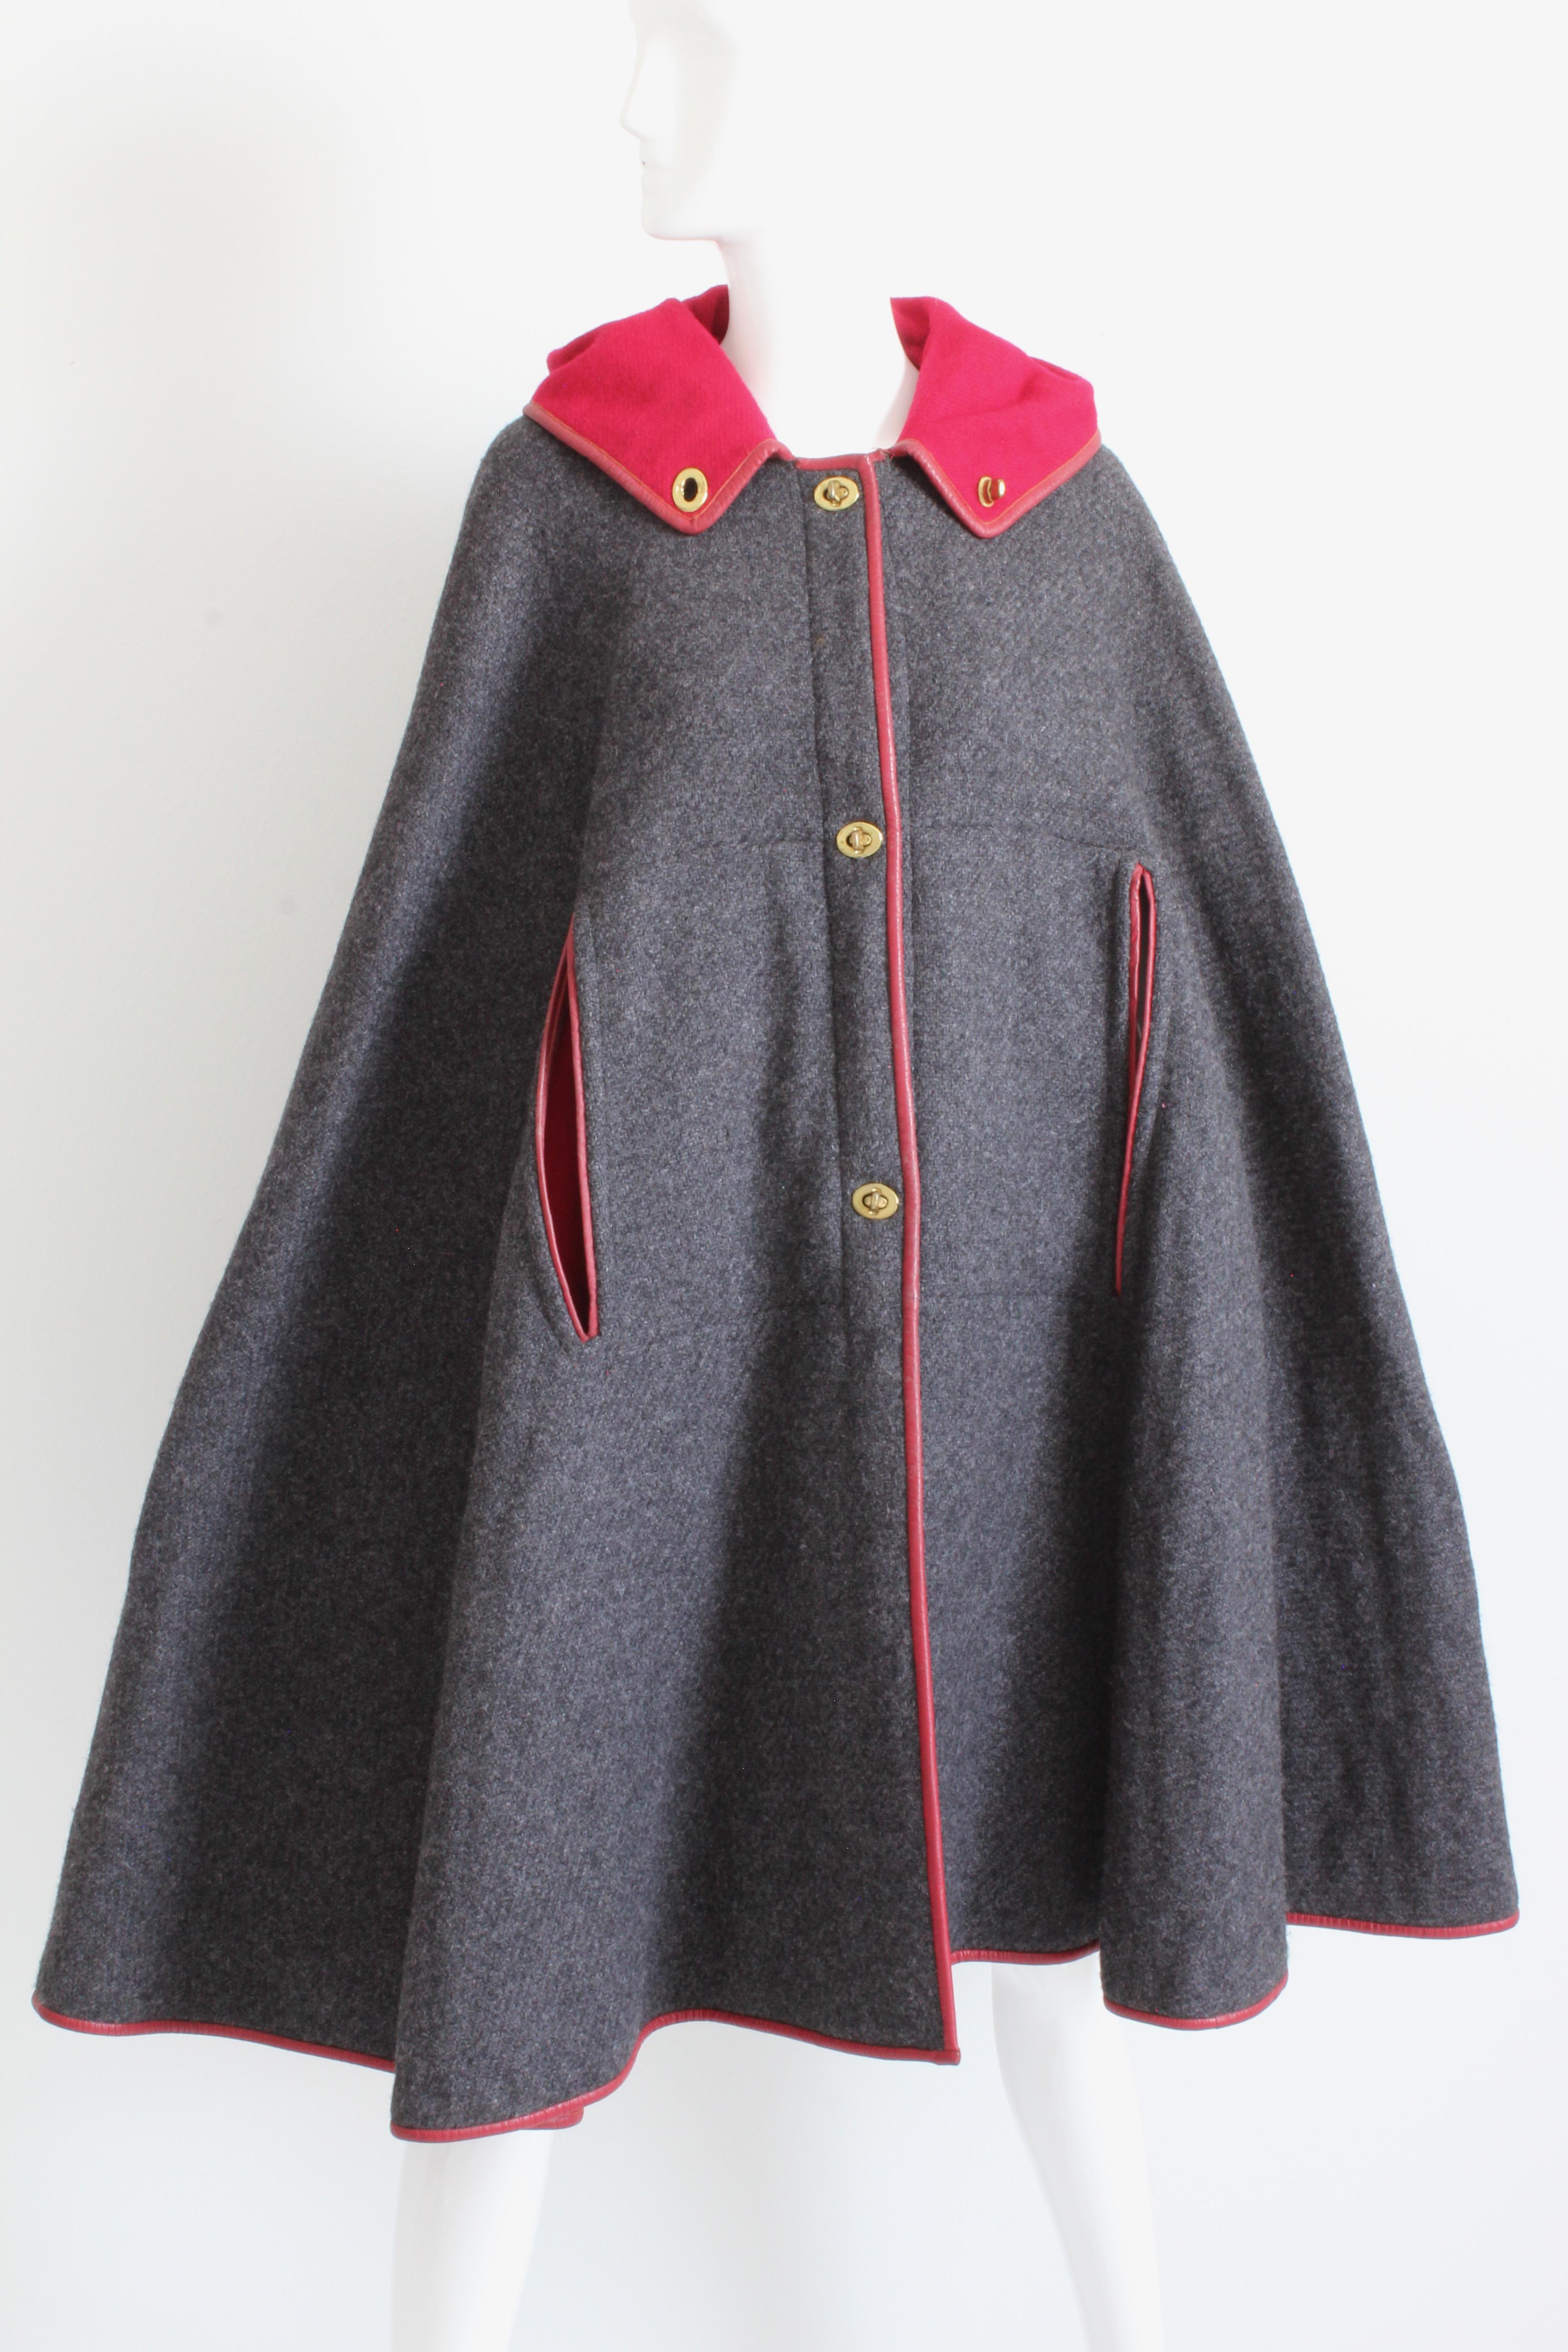 Bonnie Cashin for Sills Cape Hooded Charcoal Wool Red Leather Trim Rare Vintage For Sale 1